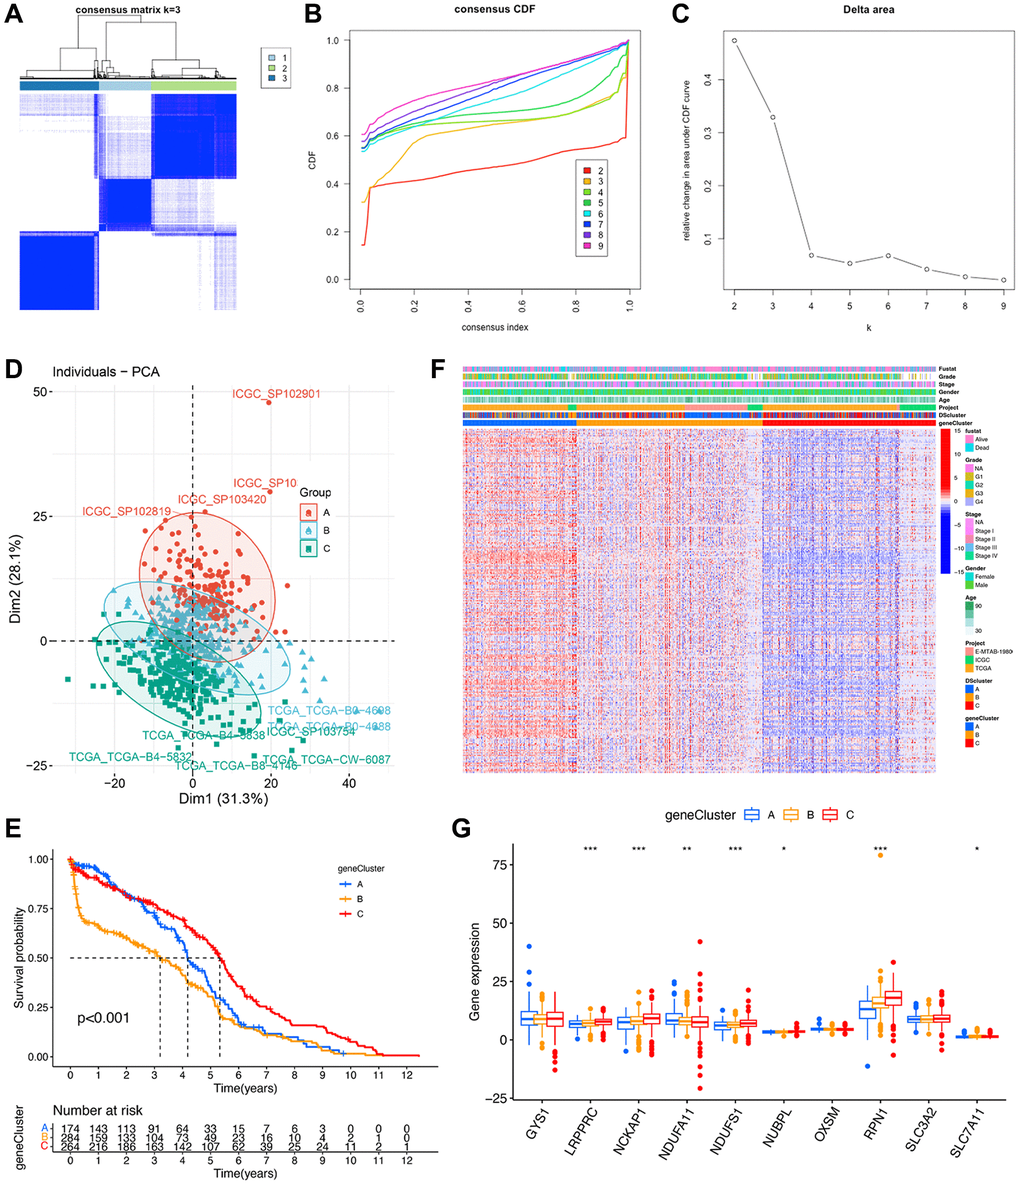 Identification of disulfidptosis gene clusters in ccRCC. (A) A color-coded heat map of the consensus matrix for k = 3. (B) Cumulative distribution function (CDF) curve of unsupervised clustering when k = 2–9. (C) Relative changes in area under the CDF curve when k = 2–9. (D) Principal component analysis showed a marked difference in the transcriptome between the three disulfidptosis gene clusters. (E) Kaplan–Meier survival curves of different disulfidptosis gene clusters. (F) Heat map of hub genes and clinicopathological features of patients in the three disulfidptosis gene clusters. (G) Expression of 10 disulfidptosis molecules in the three disulfidptosis gene clusters. *P **P ***P 